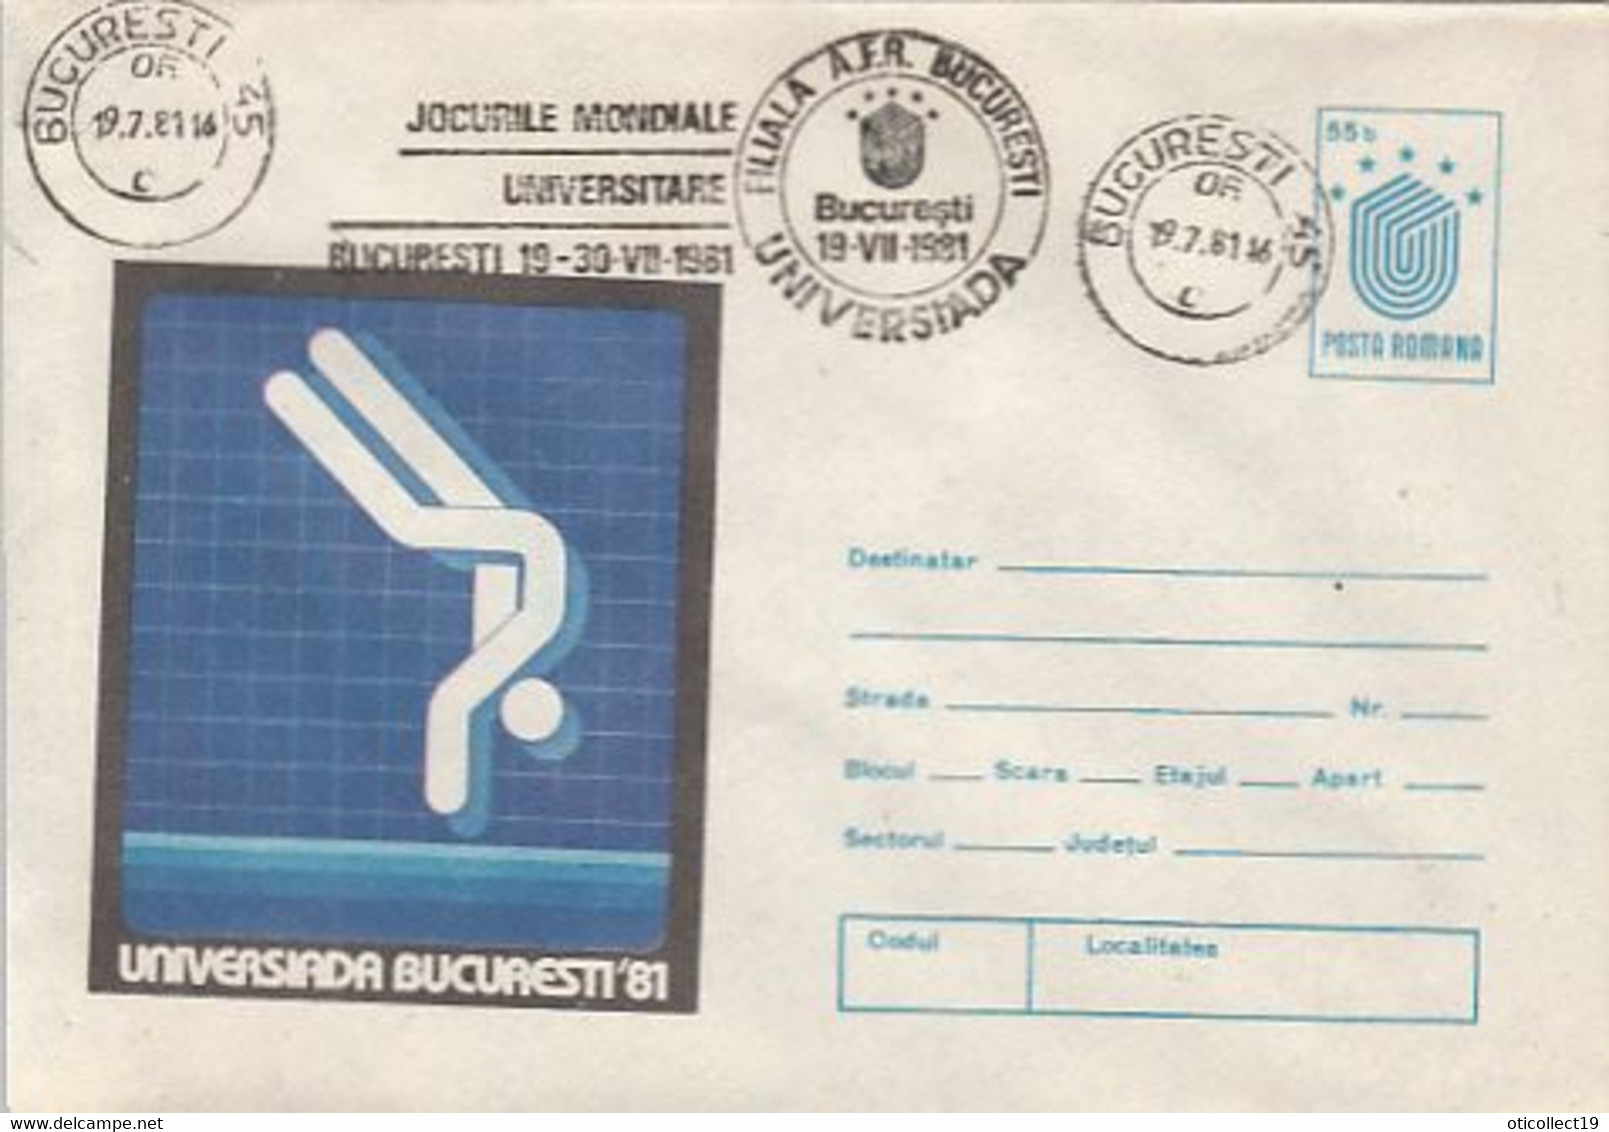 SPORTS, DIVING, WORLD UNIVERSITY GAMES, COVER STATIONERY, 1981, ROMANIA - Tauchen